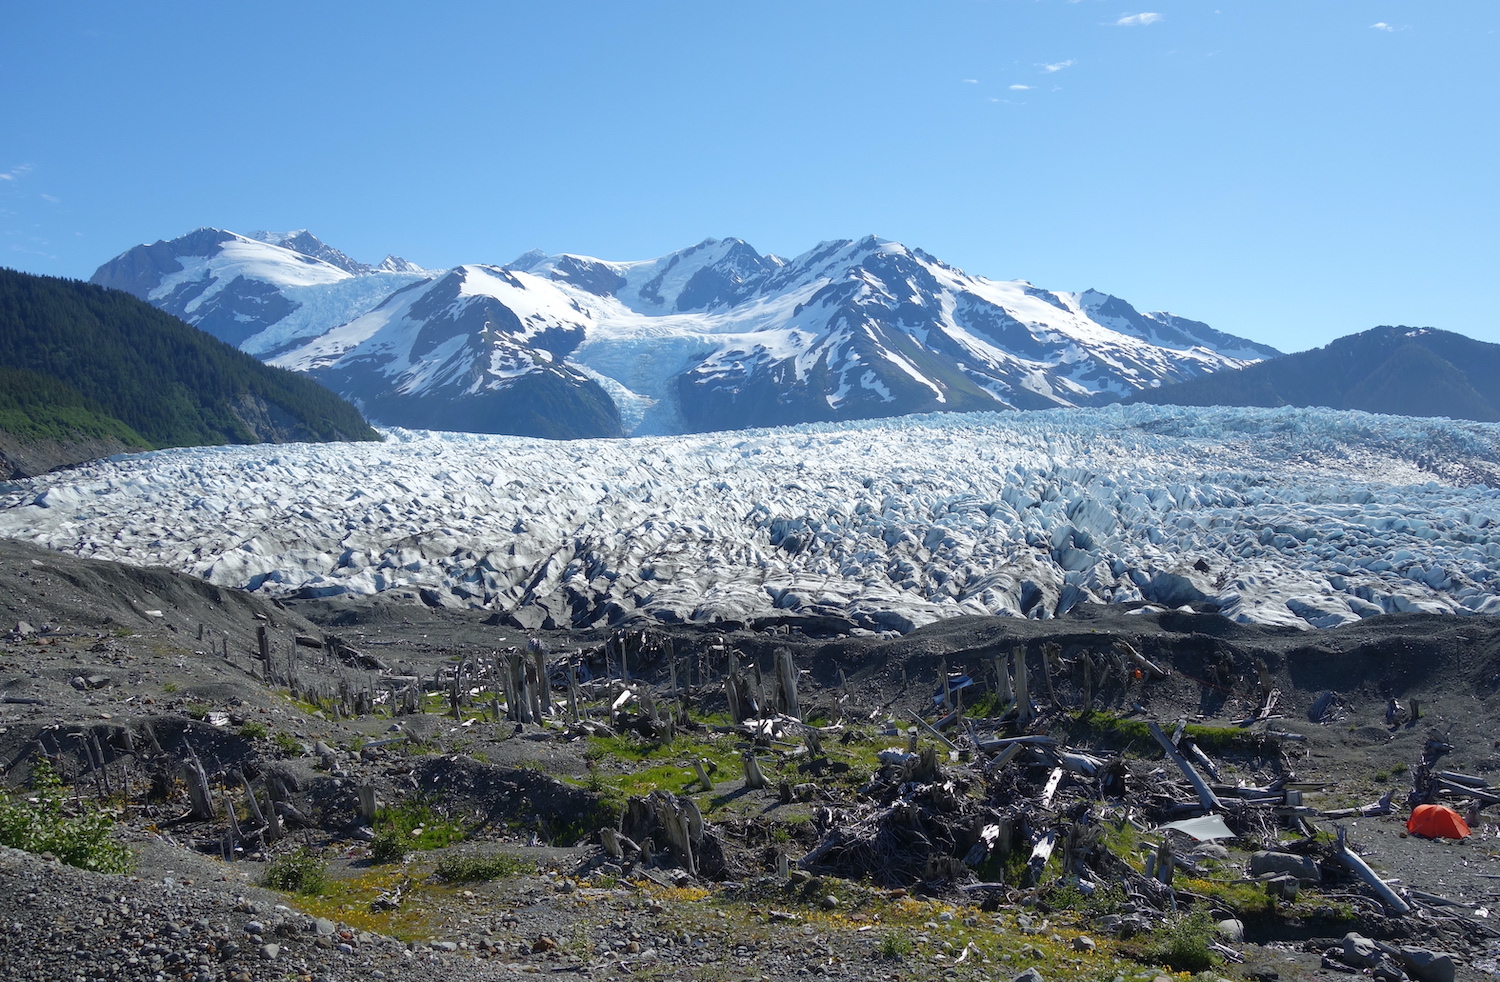 A rugged glacier and mountains rise above an expanse of gravel studded with old tree stumps.